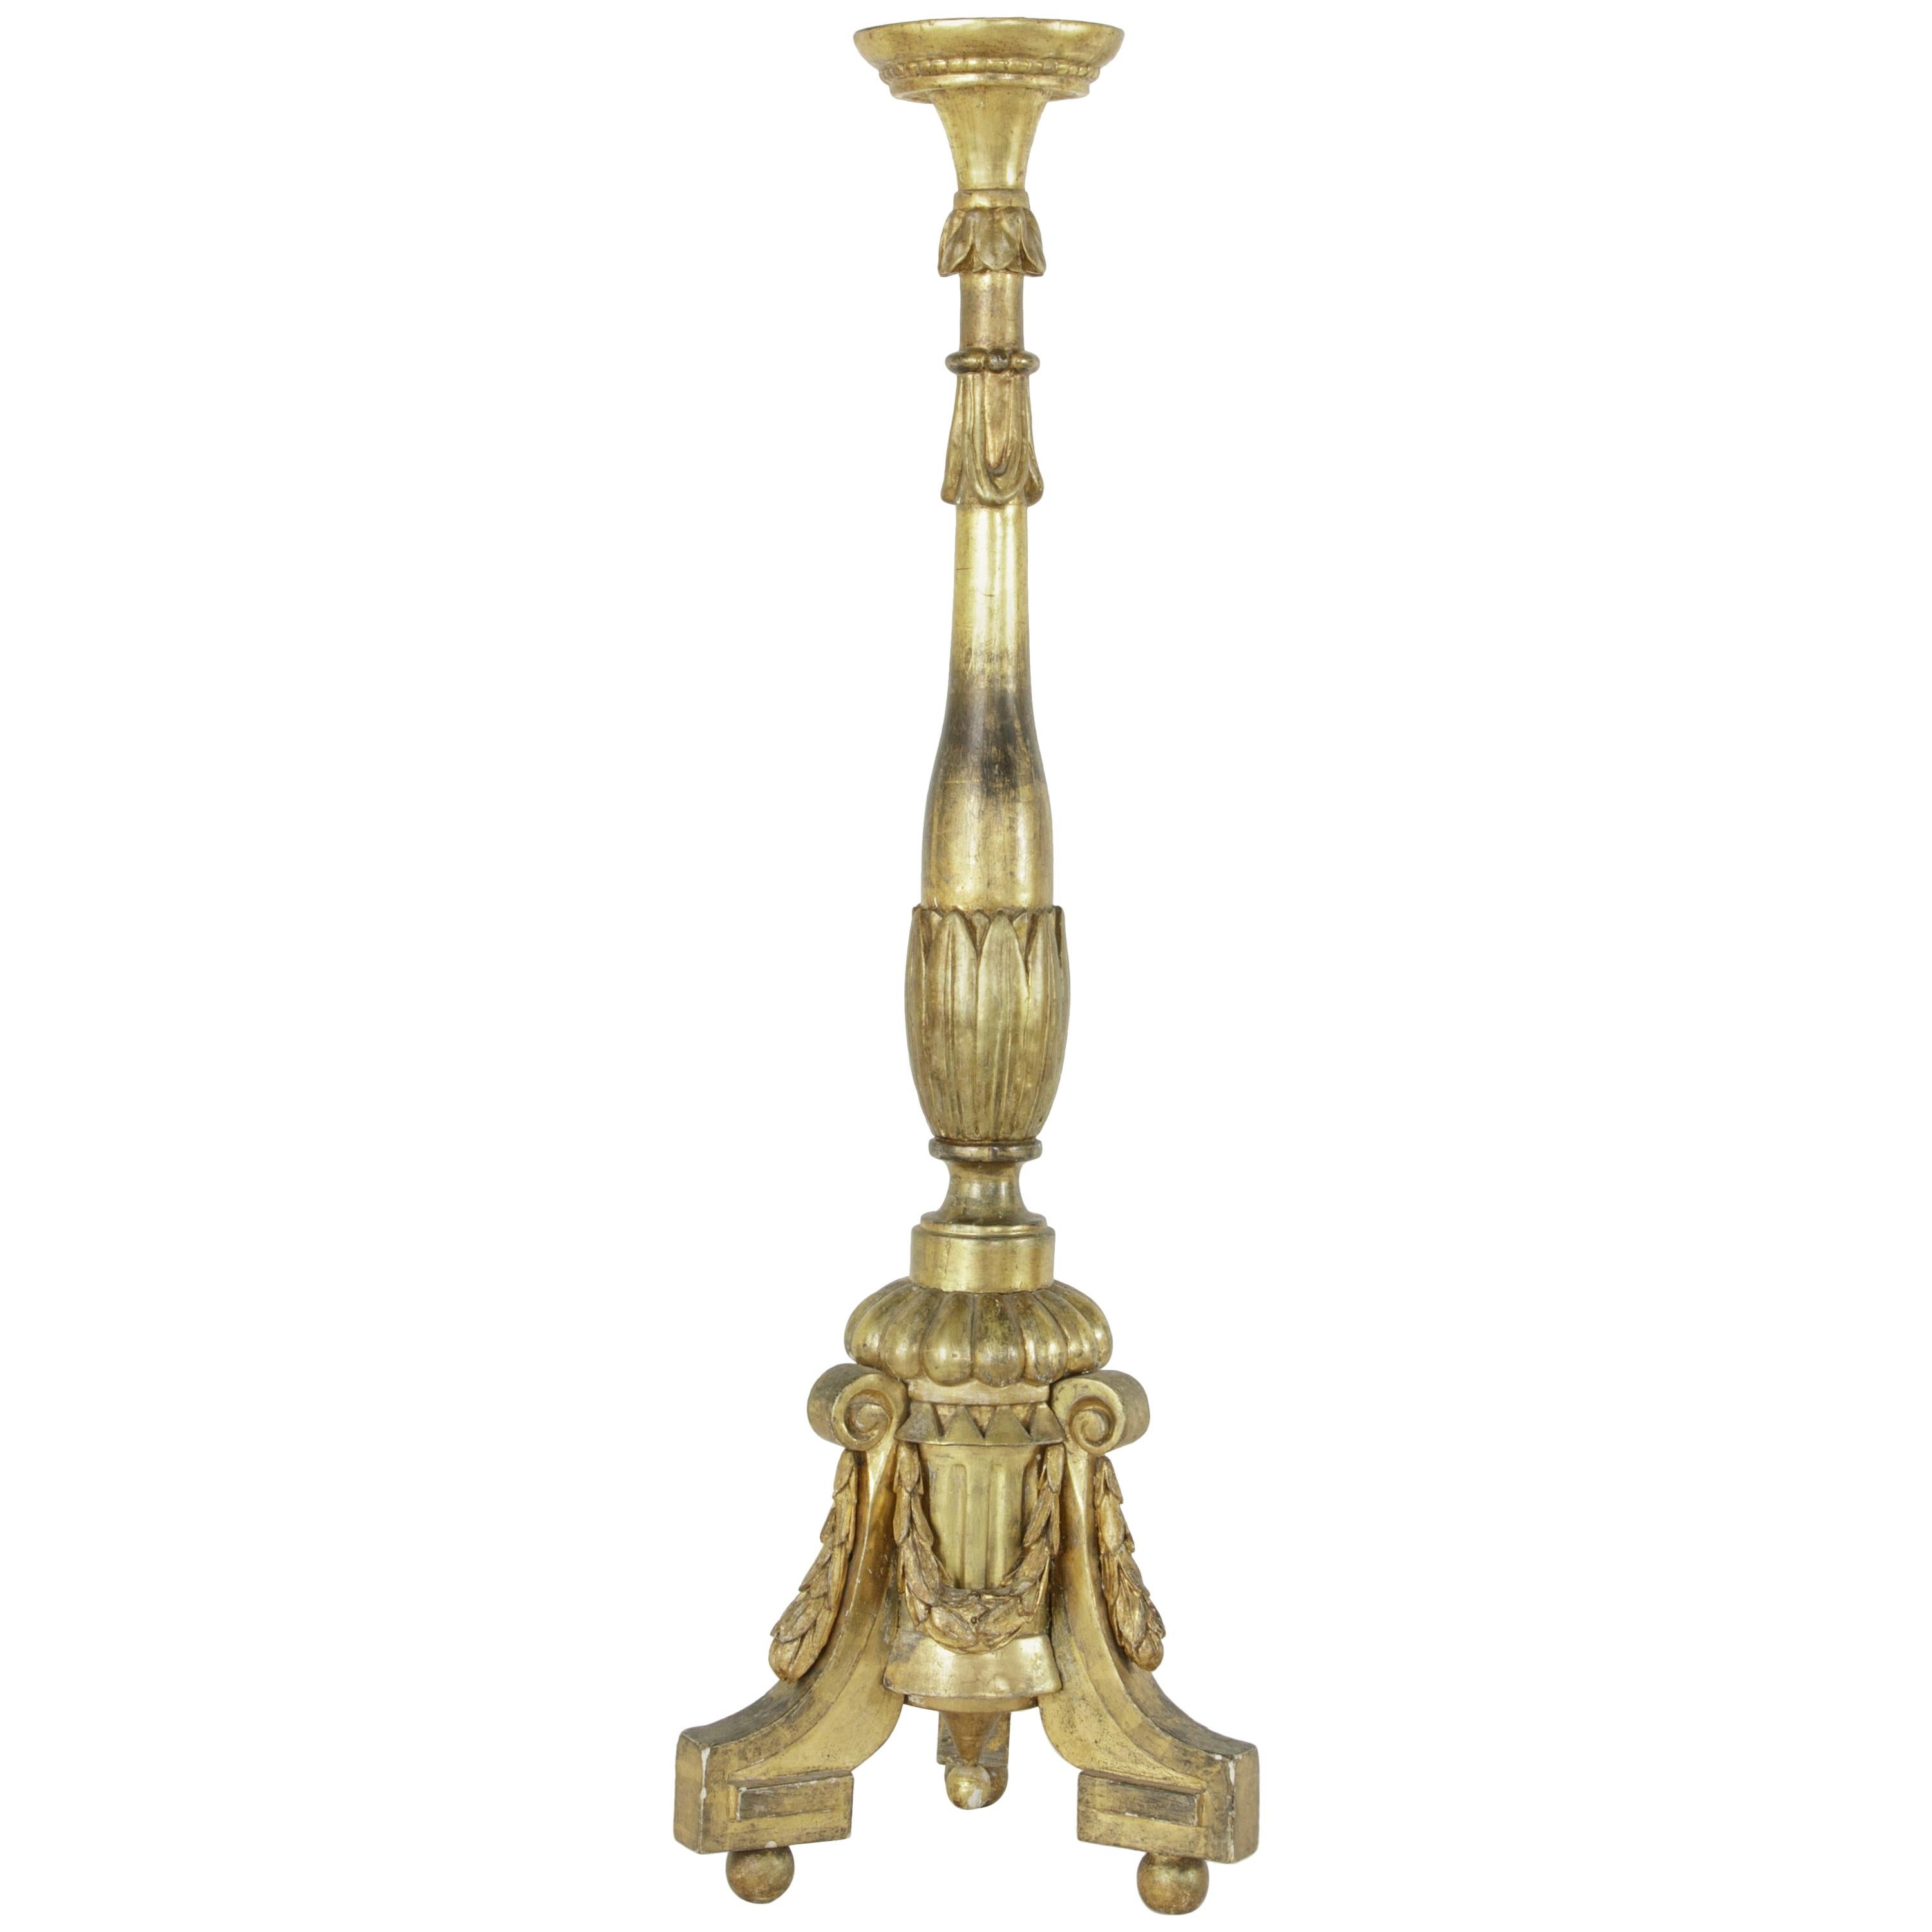 Very Tall 19th Century French Louis XVI Style Giltwood Pricket Candlestick